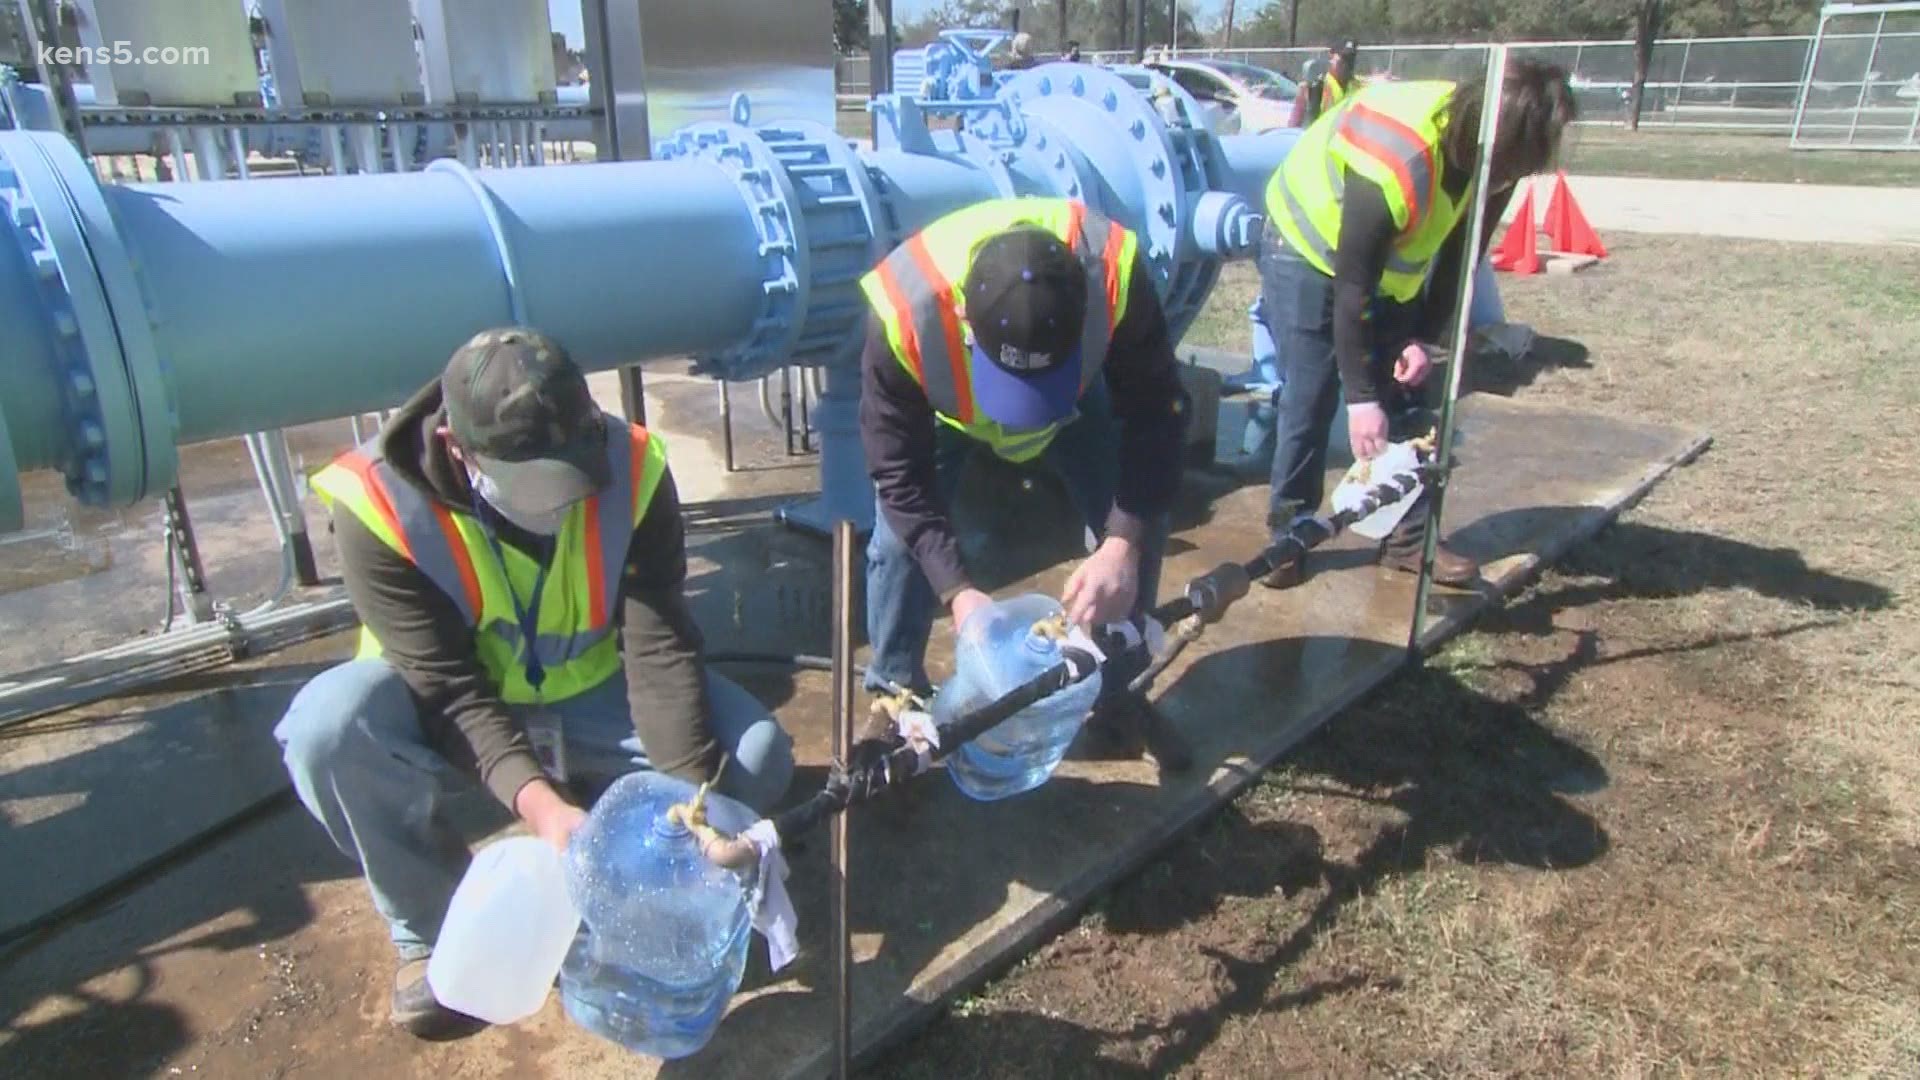 SAWS launched seven water distribution sites for people in San Antonio without water.